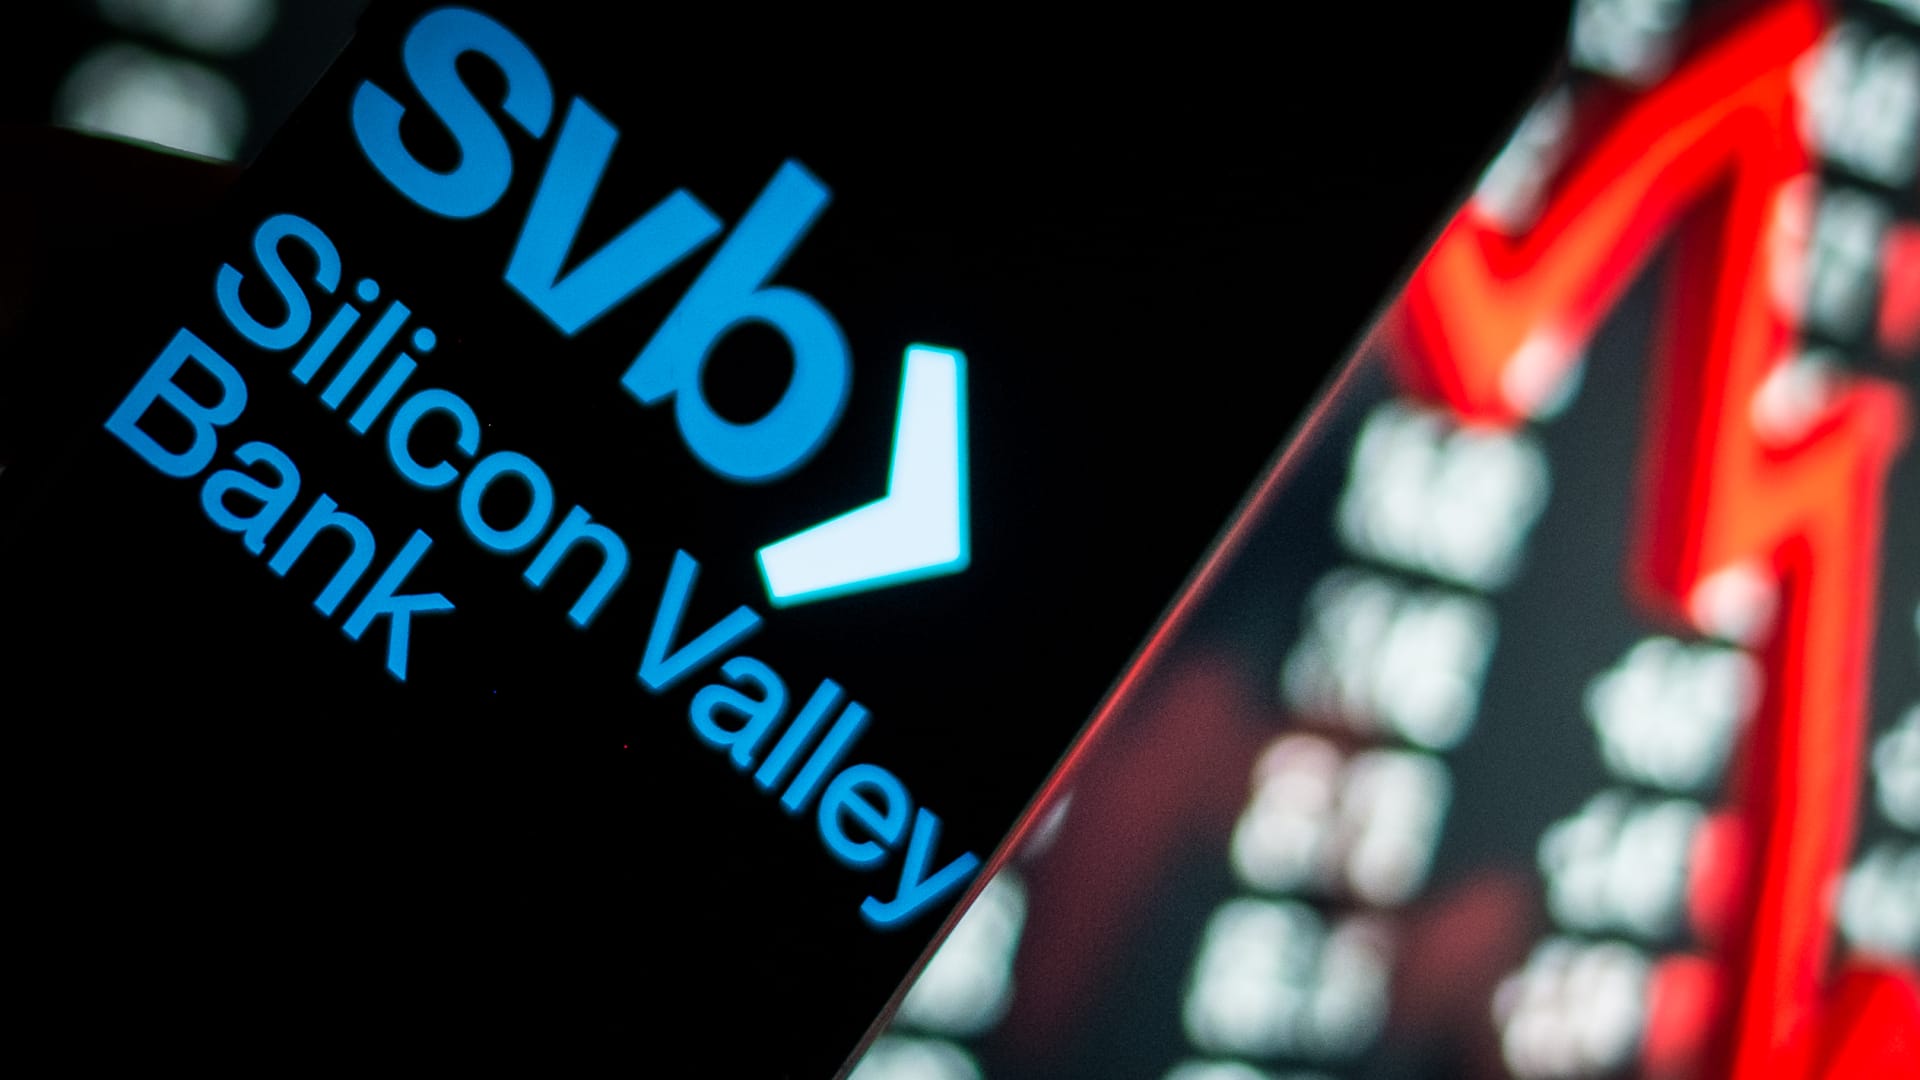 First Citizens to purchase massive chunk of failed Silicon Valley Bank